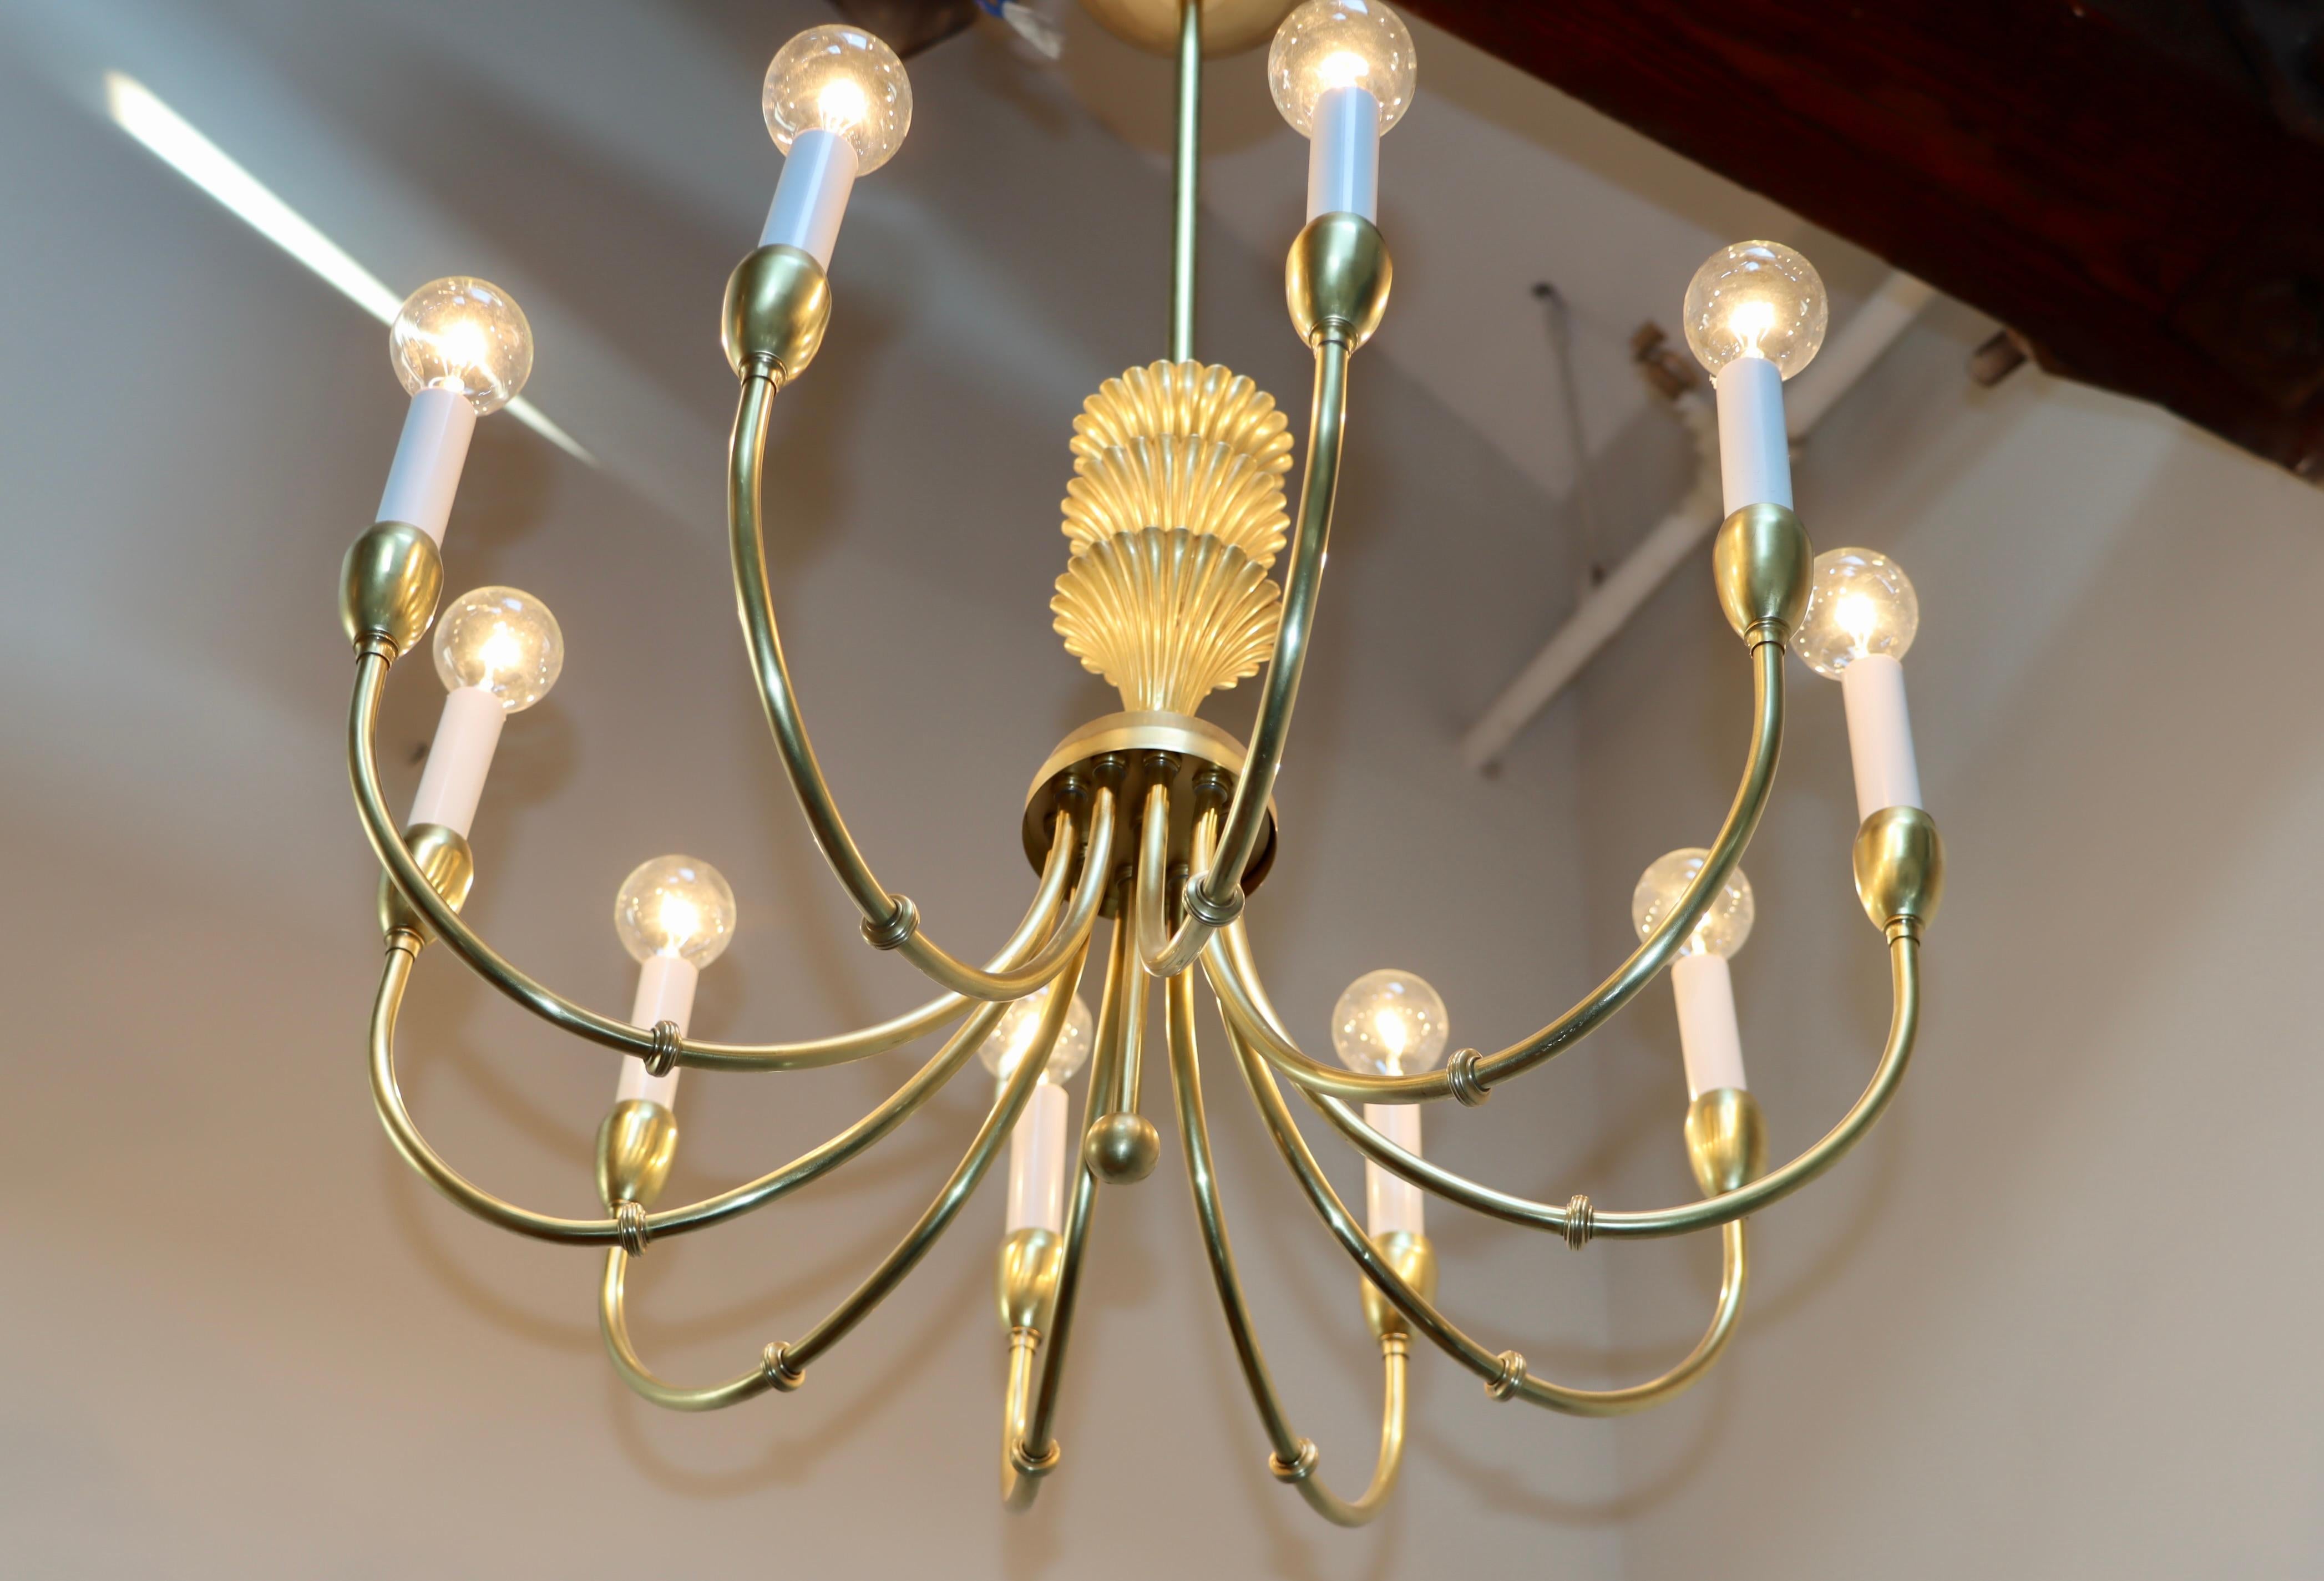 1950s Italian Brass 10 Arm Chandelier in the Style of Gio Ponti For Sale 11